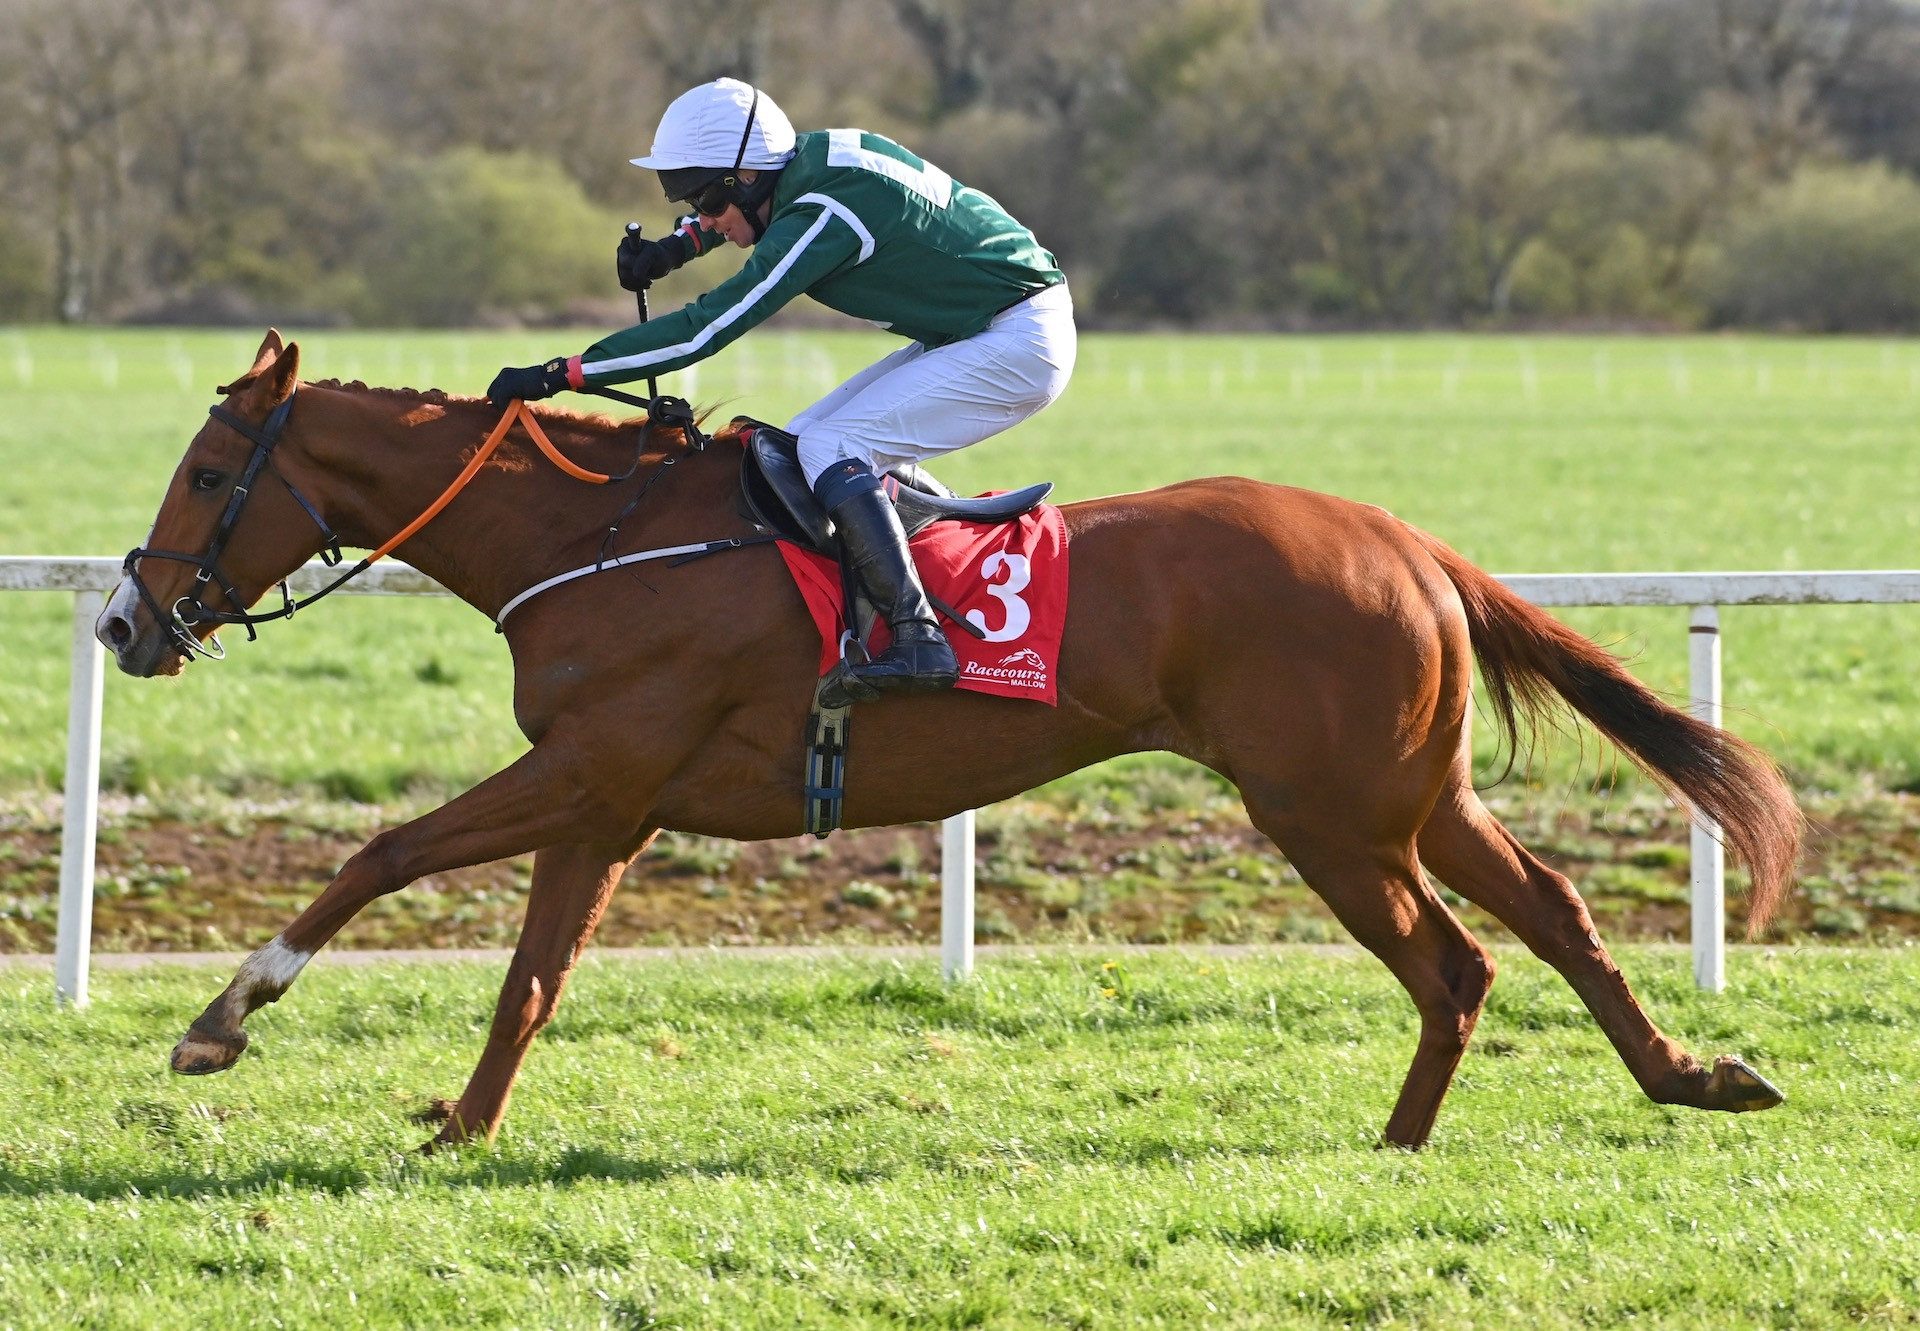 Belle The Lioness (Soldier Of Fortune) Wins The Mares’ Point To Point Flat Race Cork